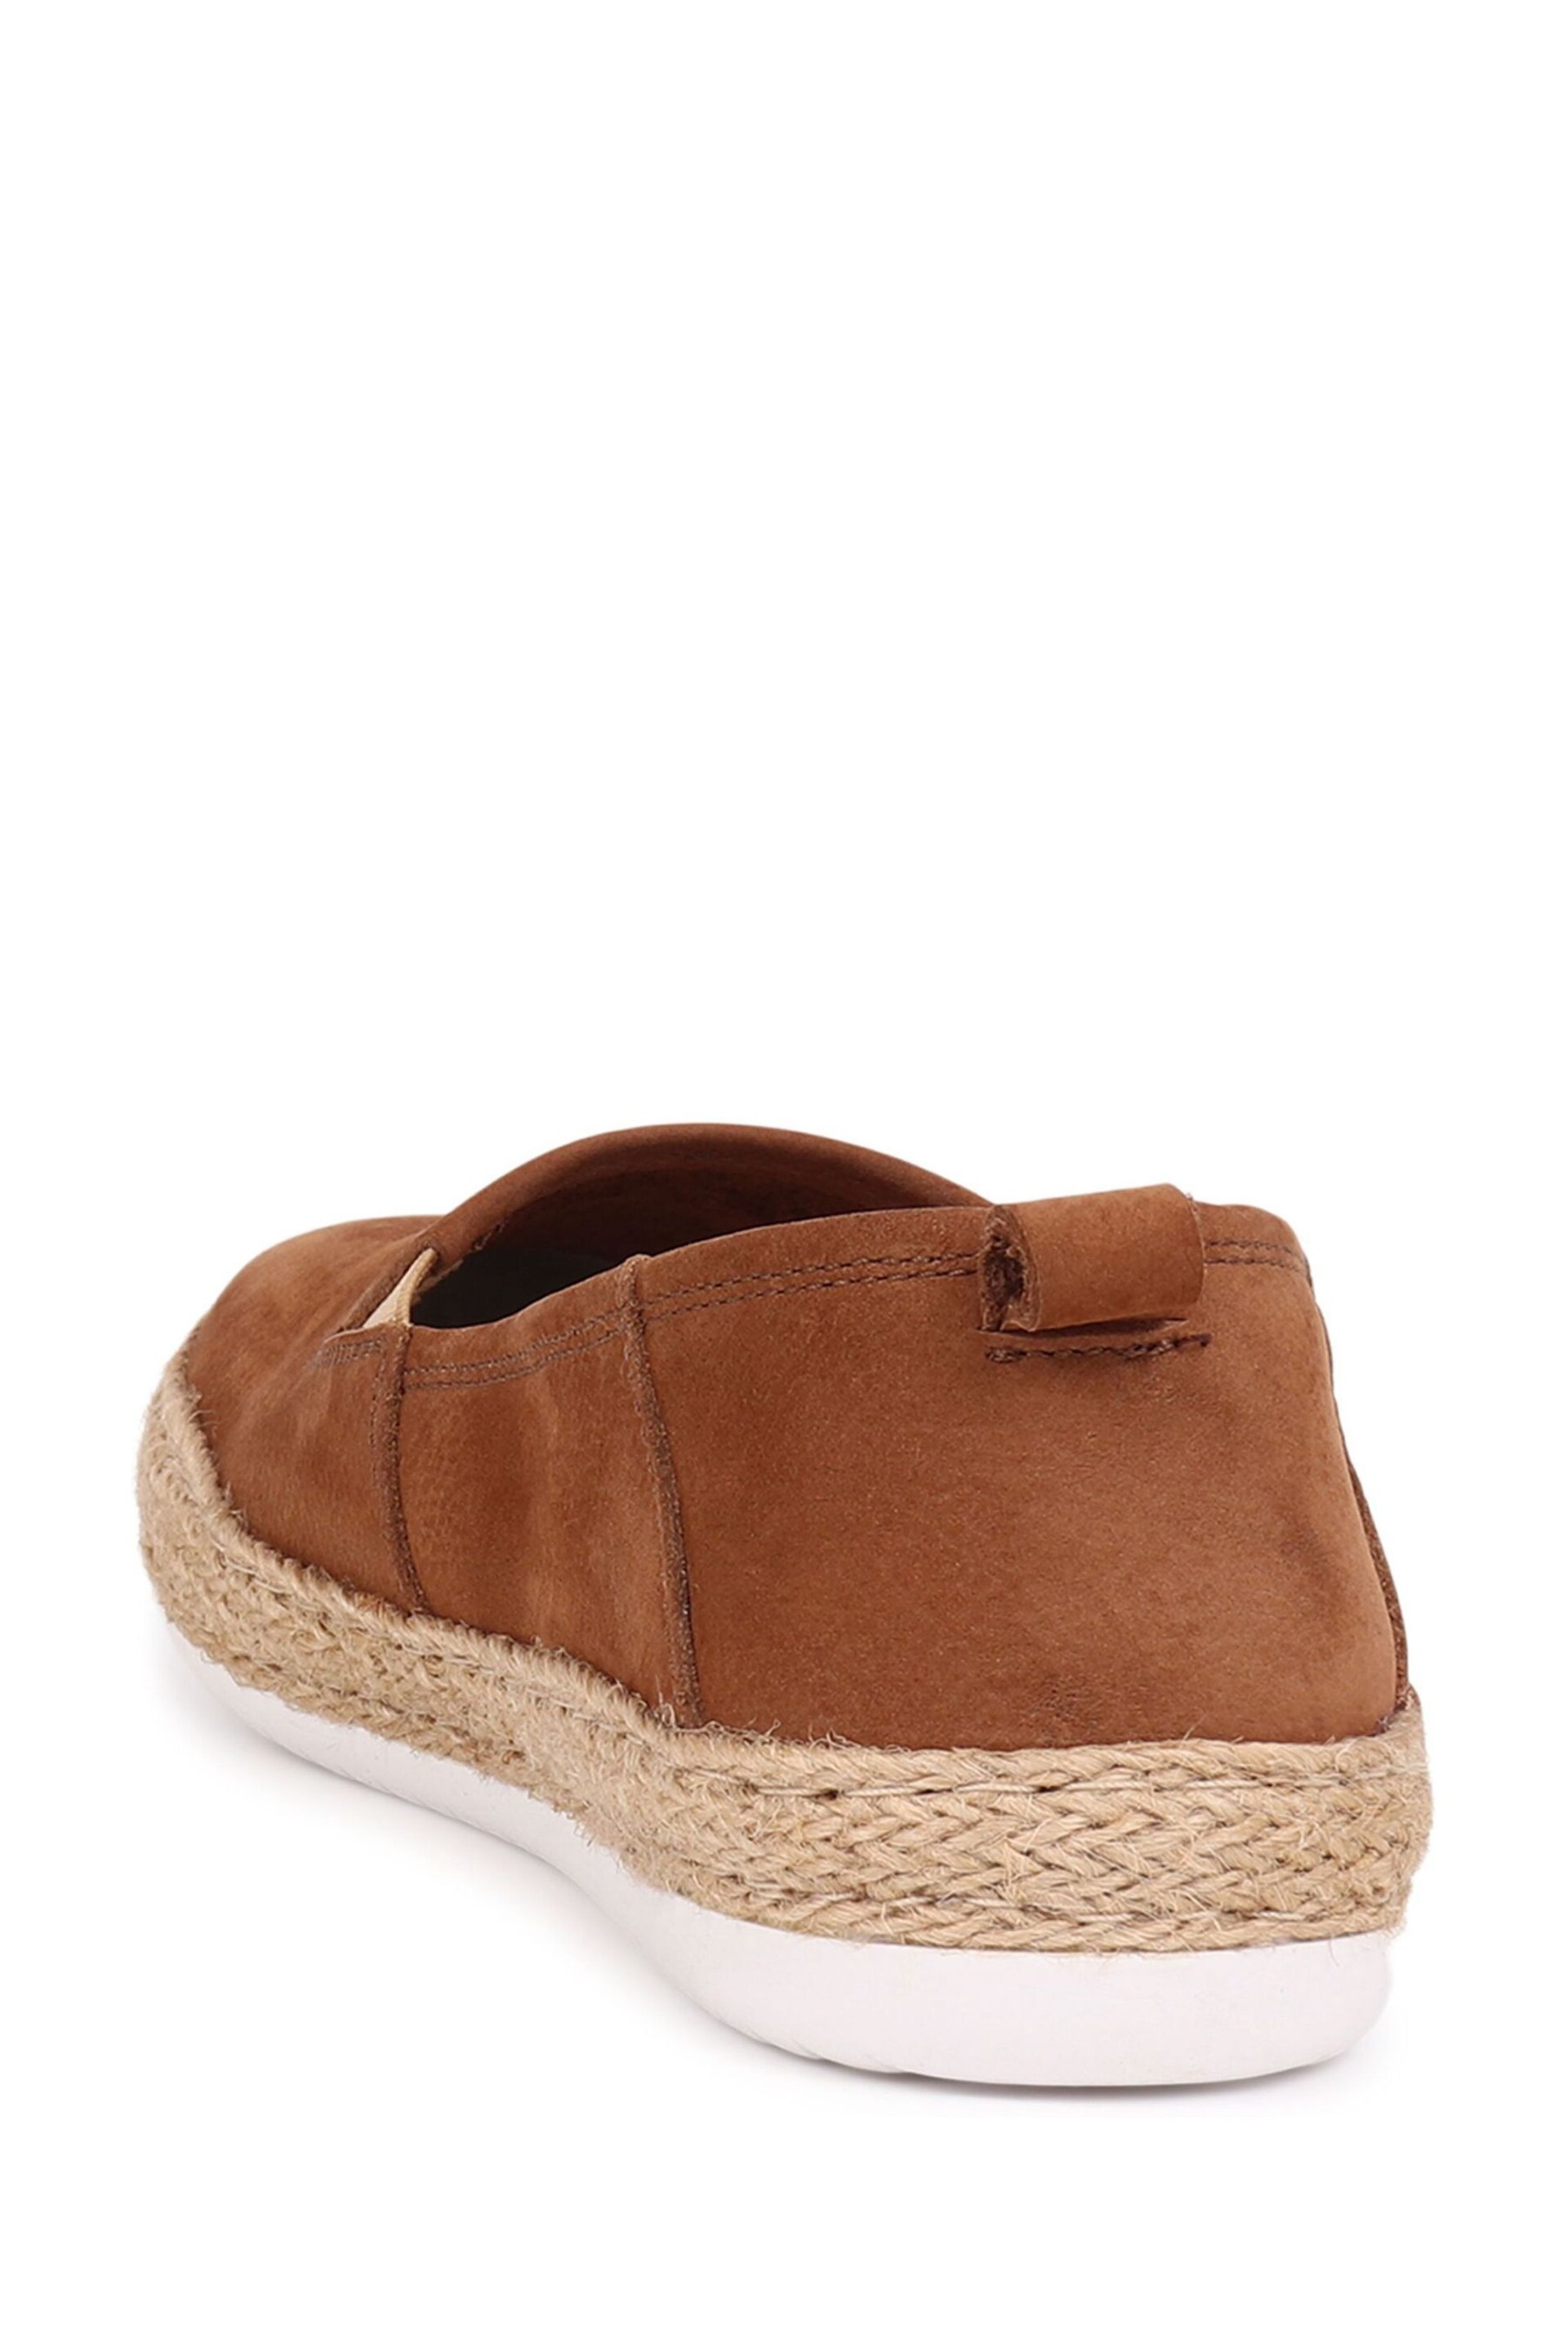 Pavers Natural Milan Leather Espadrille Flats - Image 3 of 5